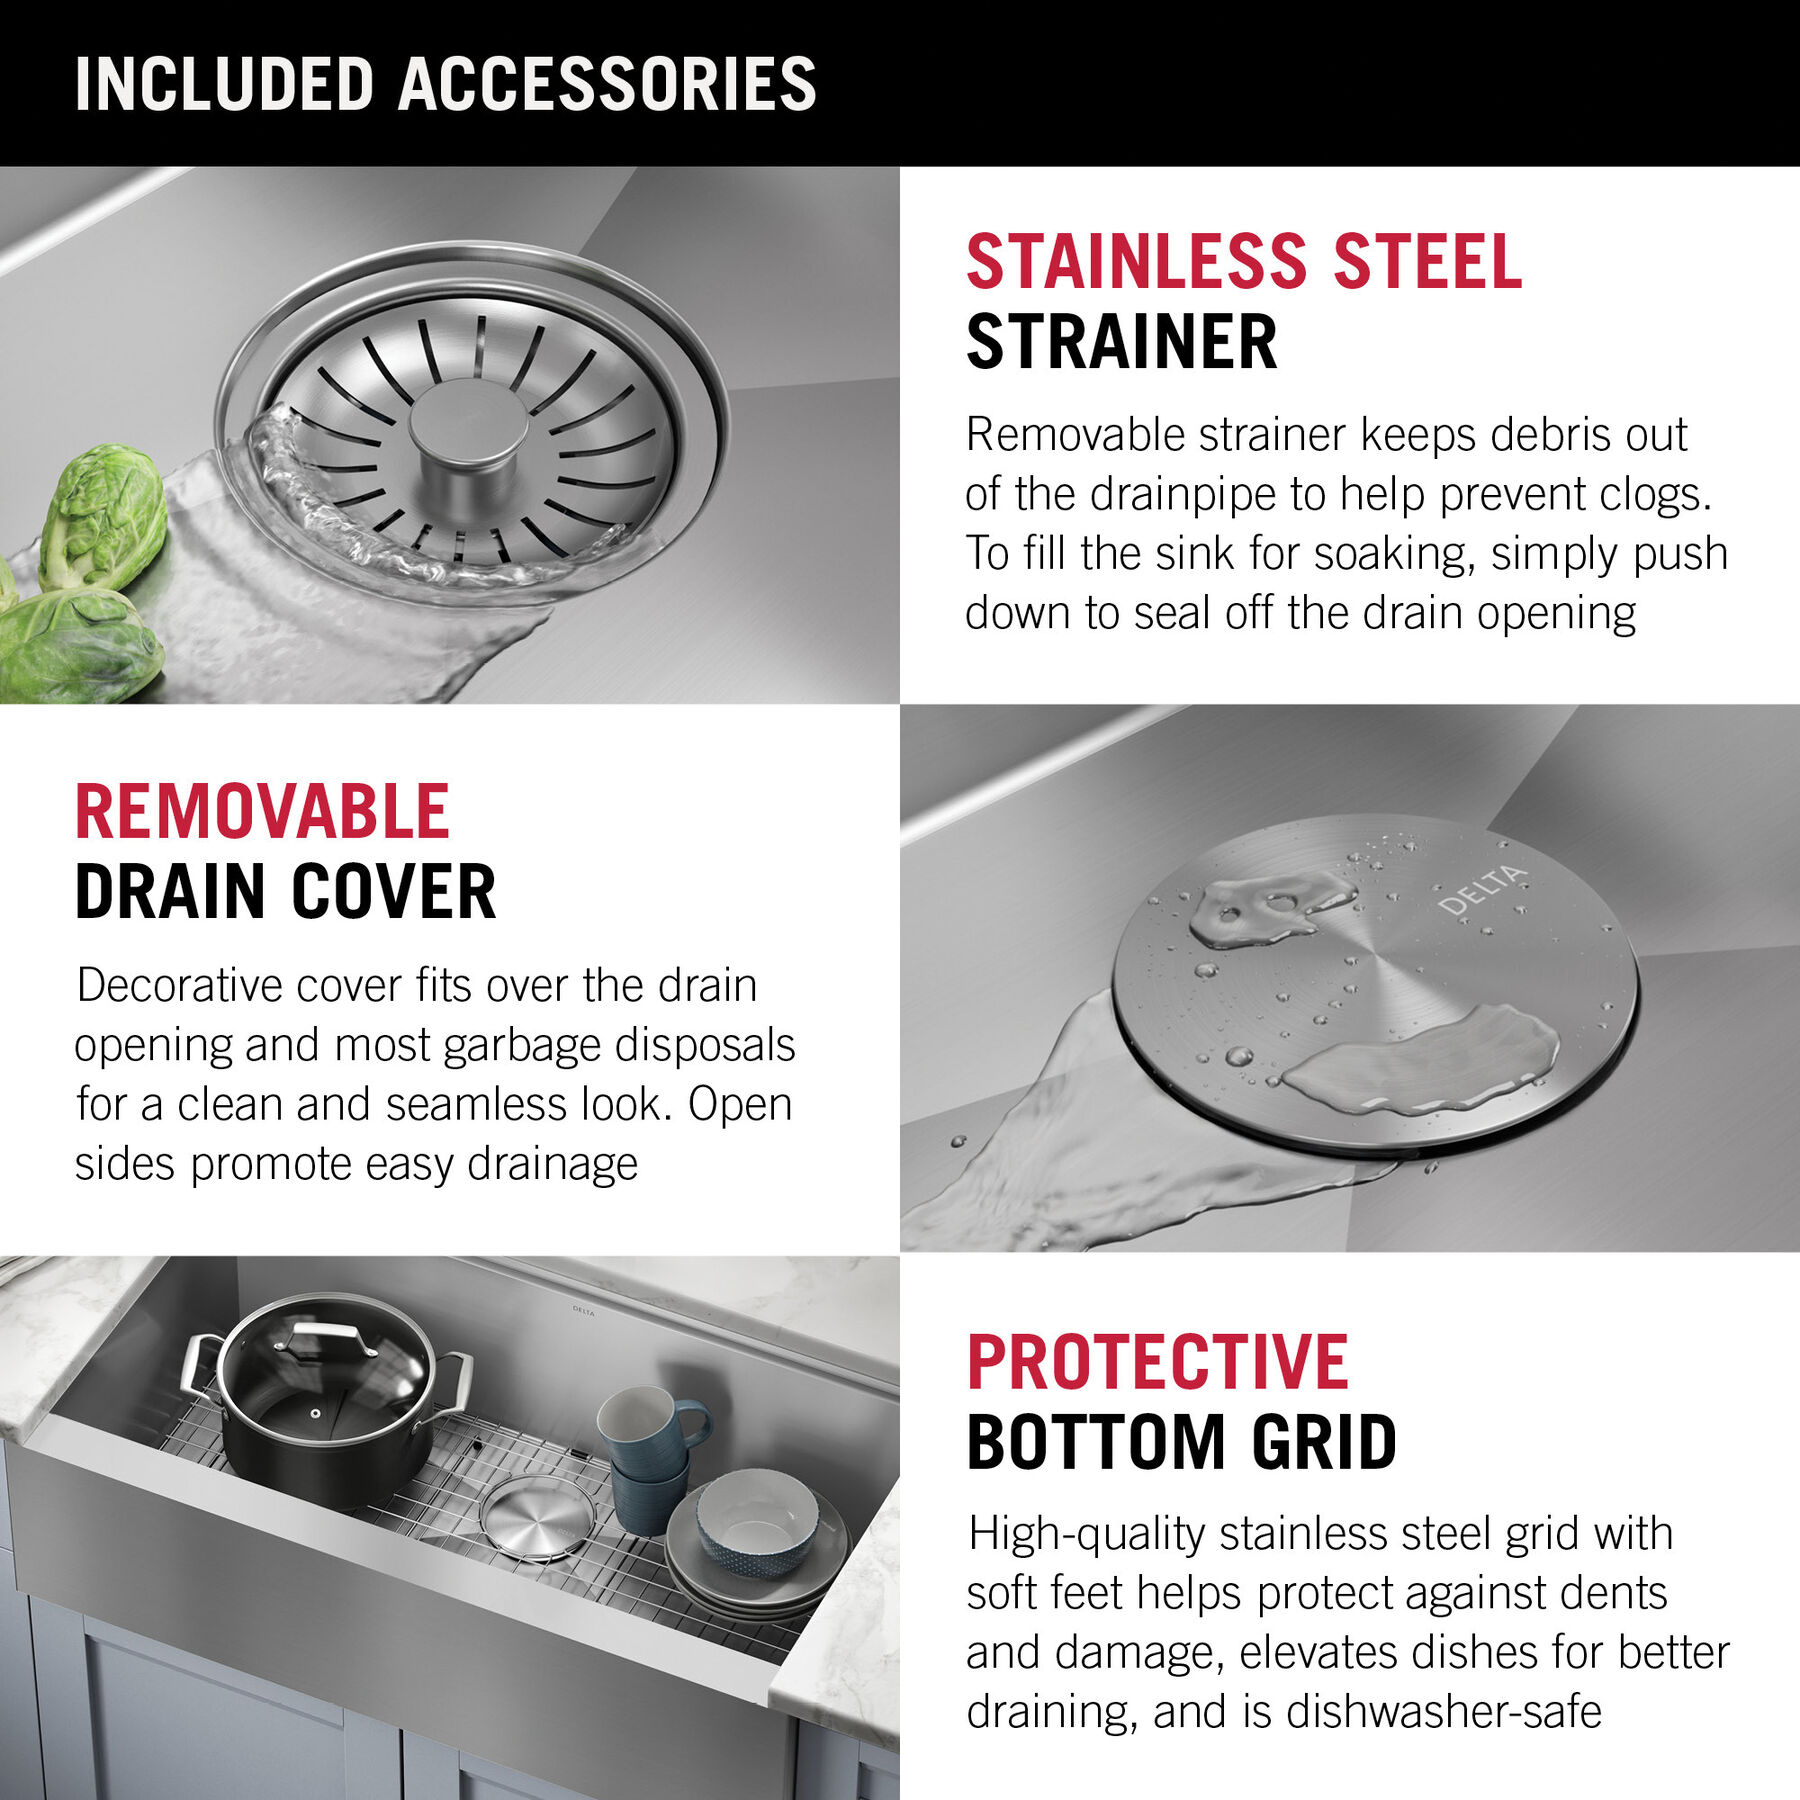 Stainless Steel 36 in. Double Bowl Undermount Kitchen Sink, Thin Divider  and Heavy-Duty Grids